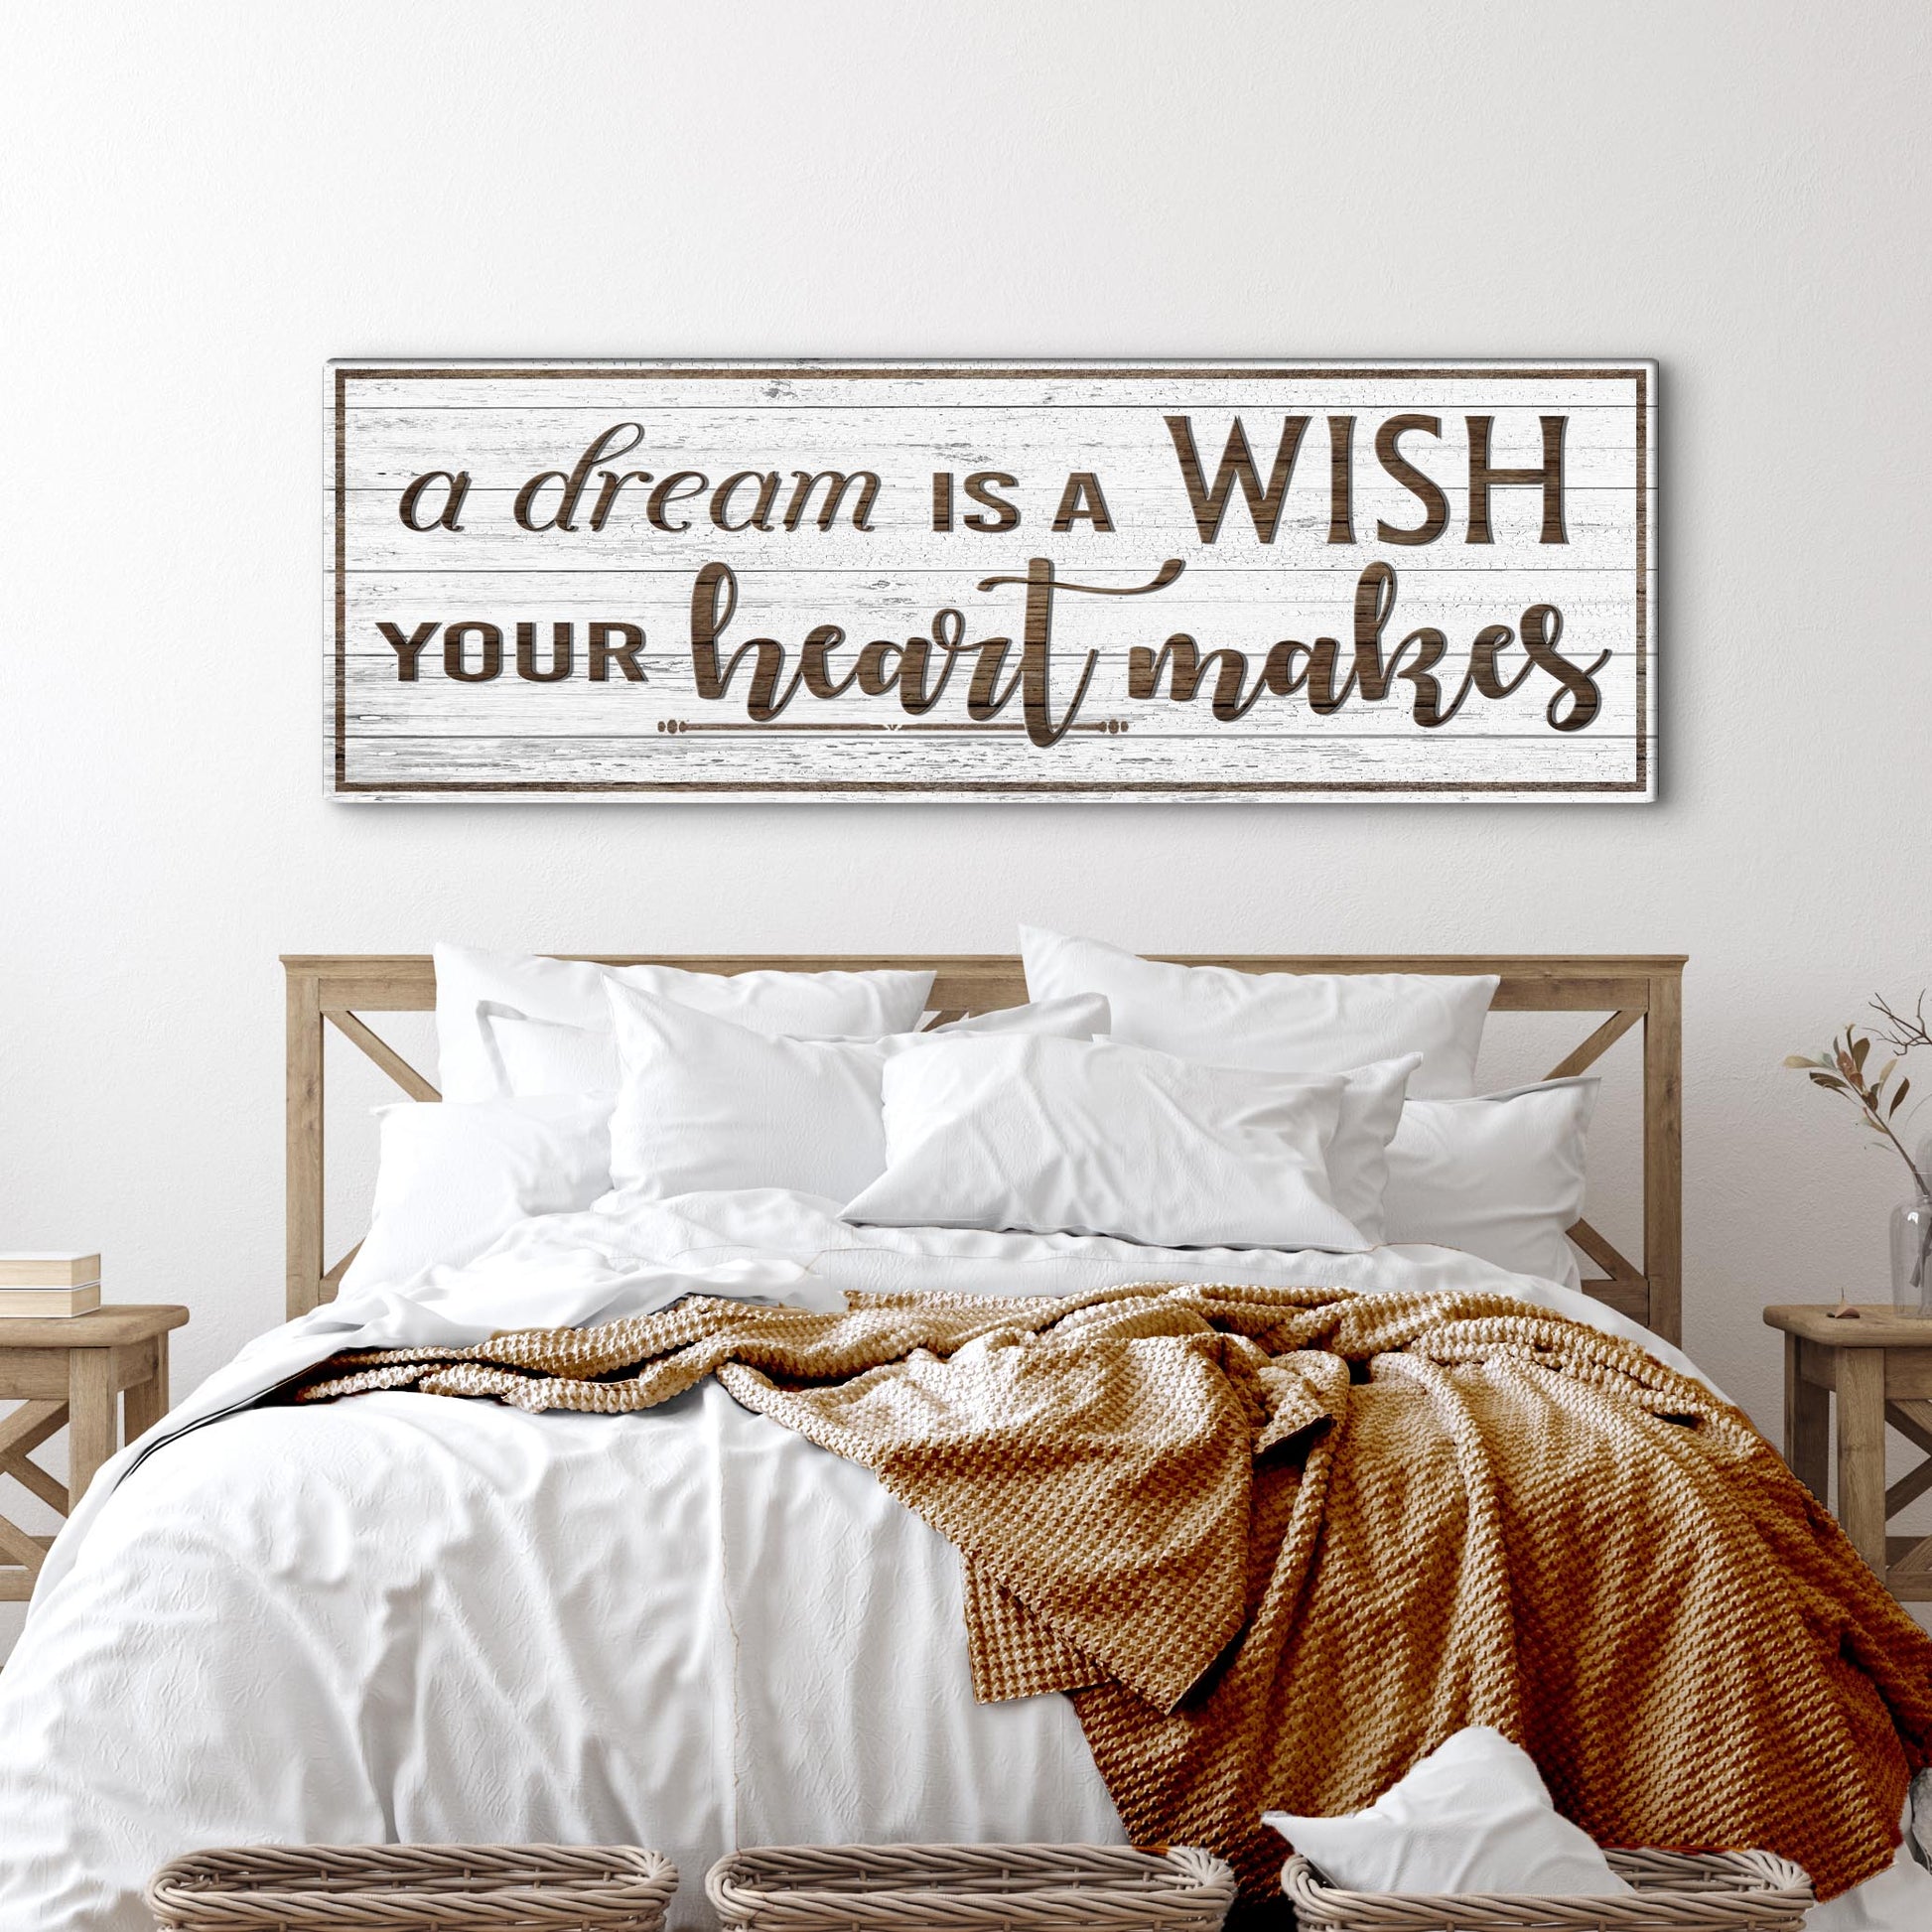 A Dream Is A Wish Your Heart Makes Sign - Image by Tailored Canvases